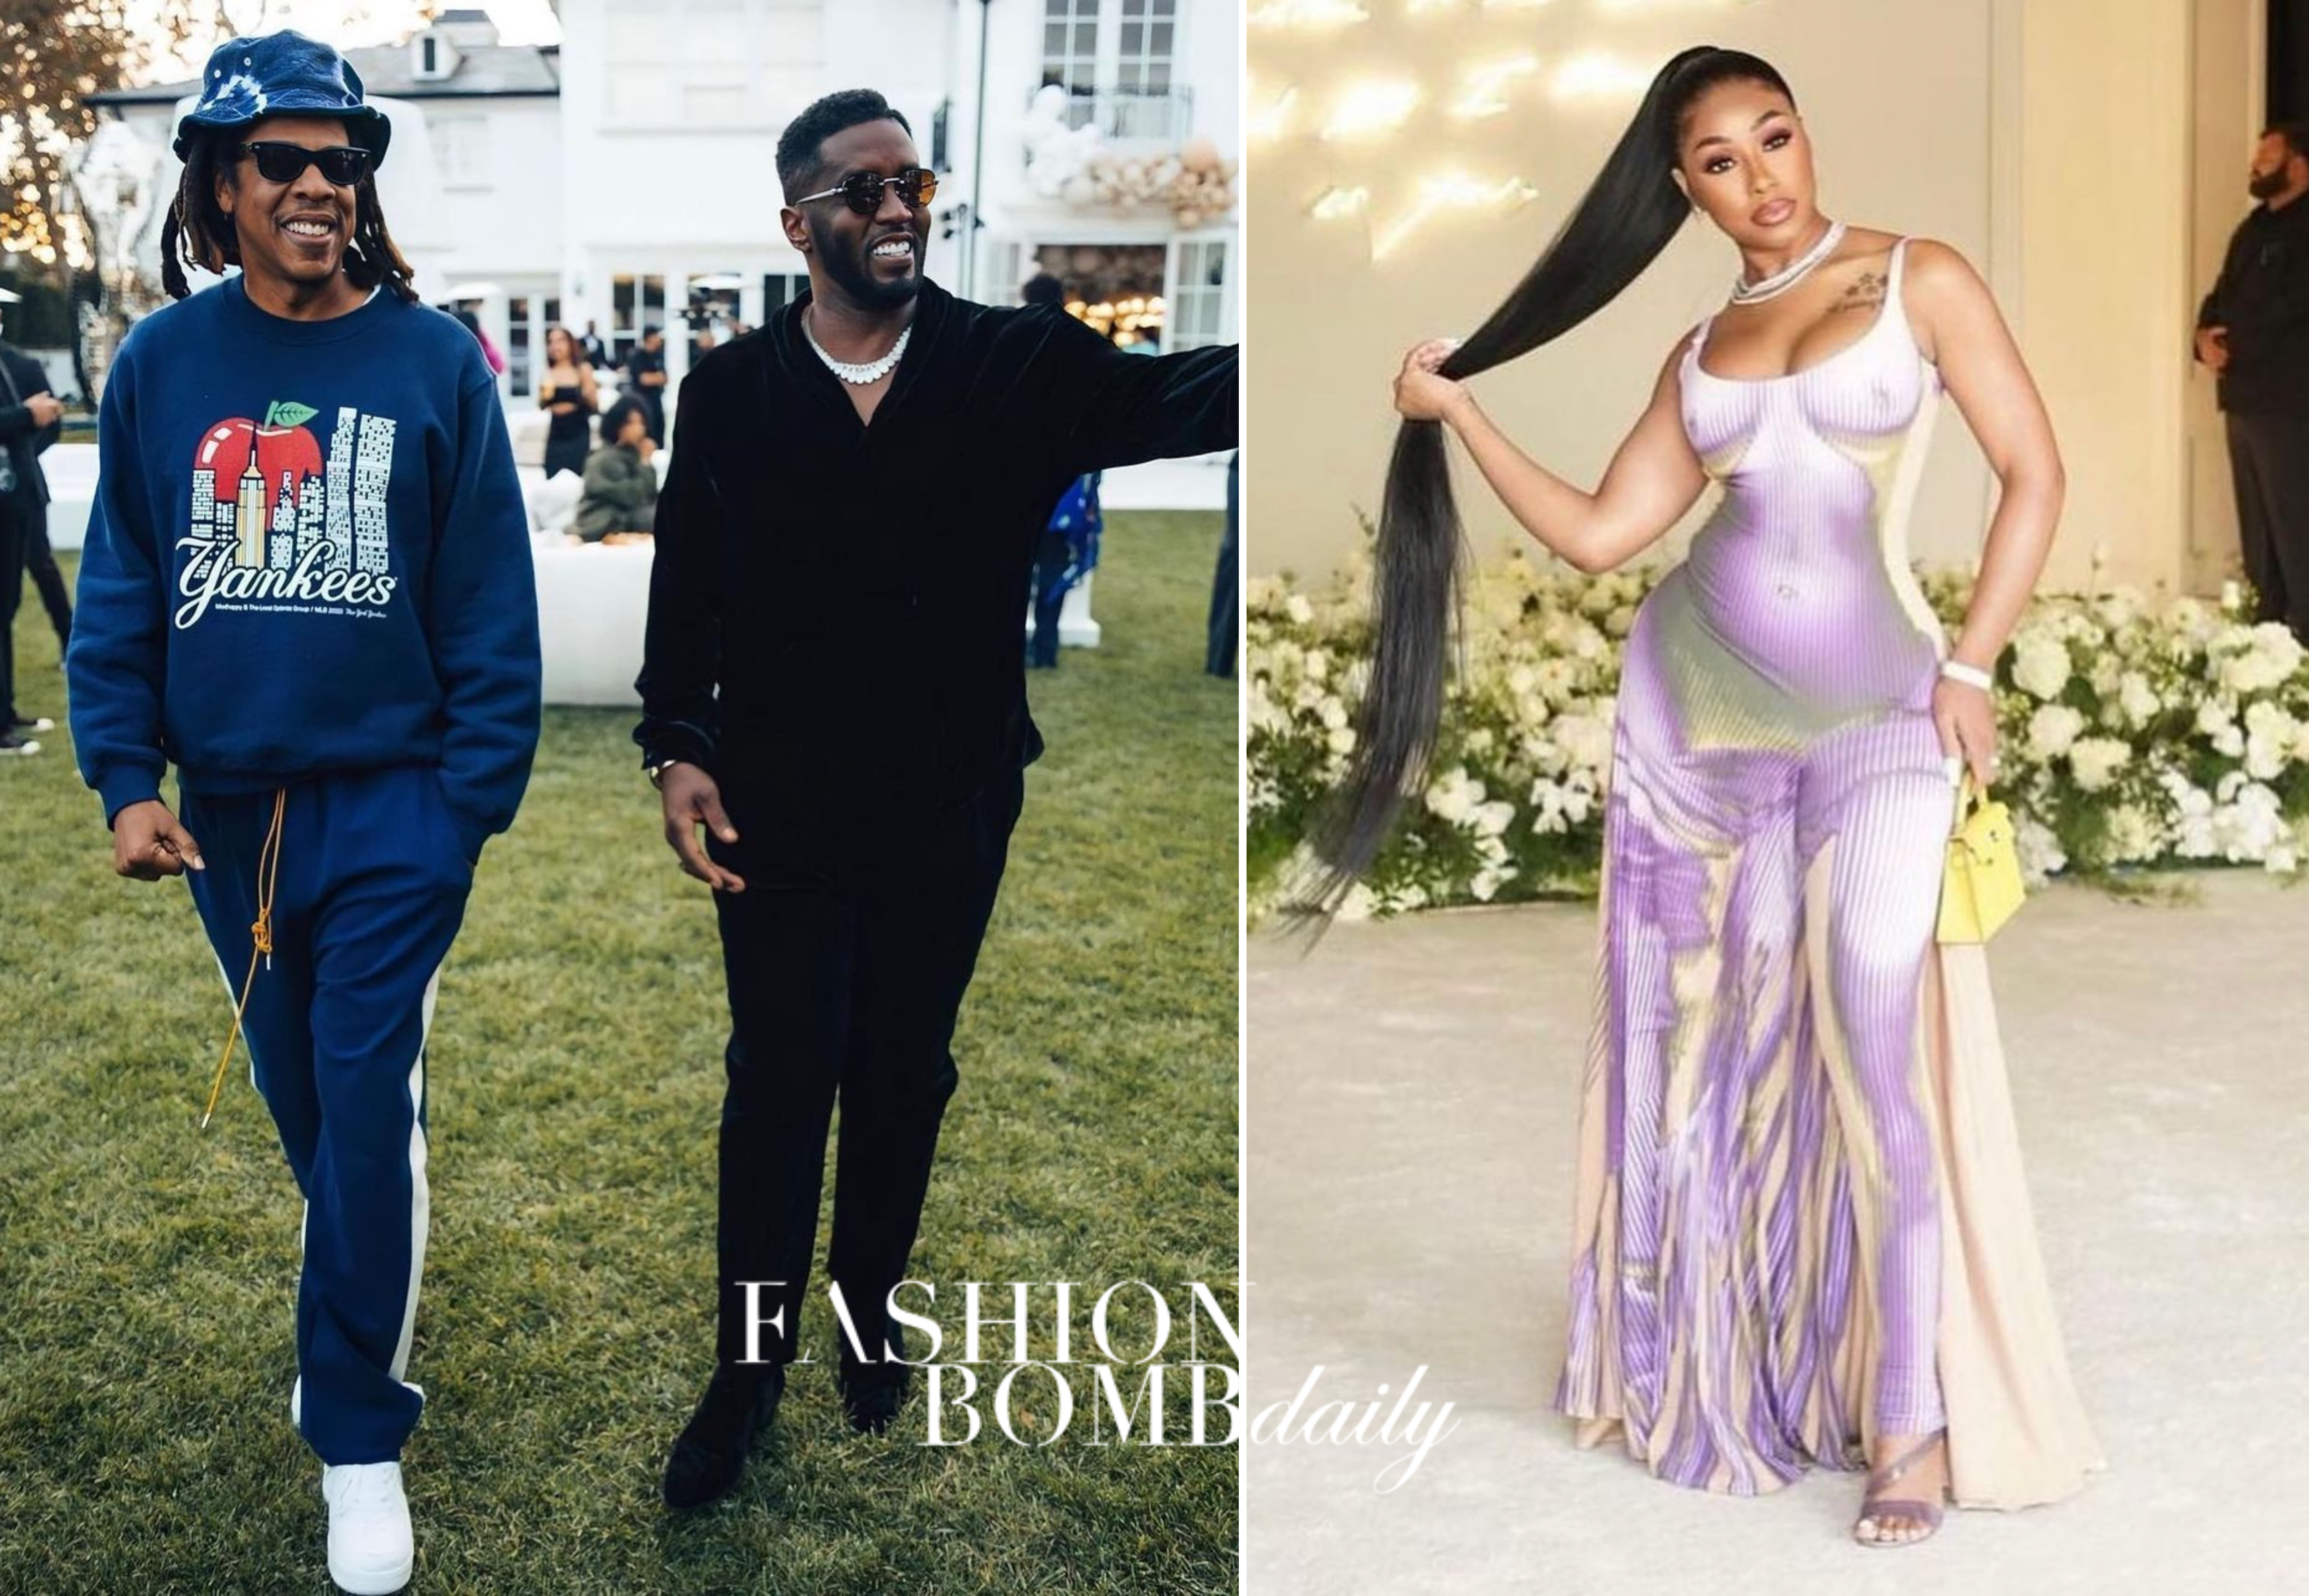 What the Stars Wore to Diddy's 53rd Birthday Celebration: Mary J. Blige Toasted in D&G, Yung Miami Partied Wearing Jean Paul Gaultier x Y/Project, Jay-Z Attended in Rhude and More